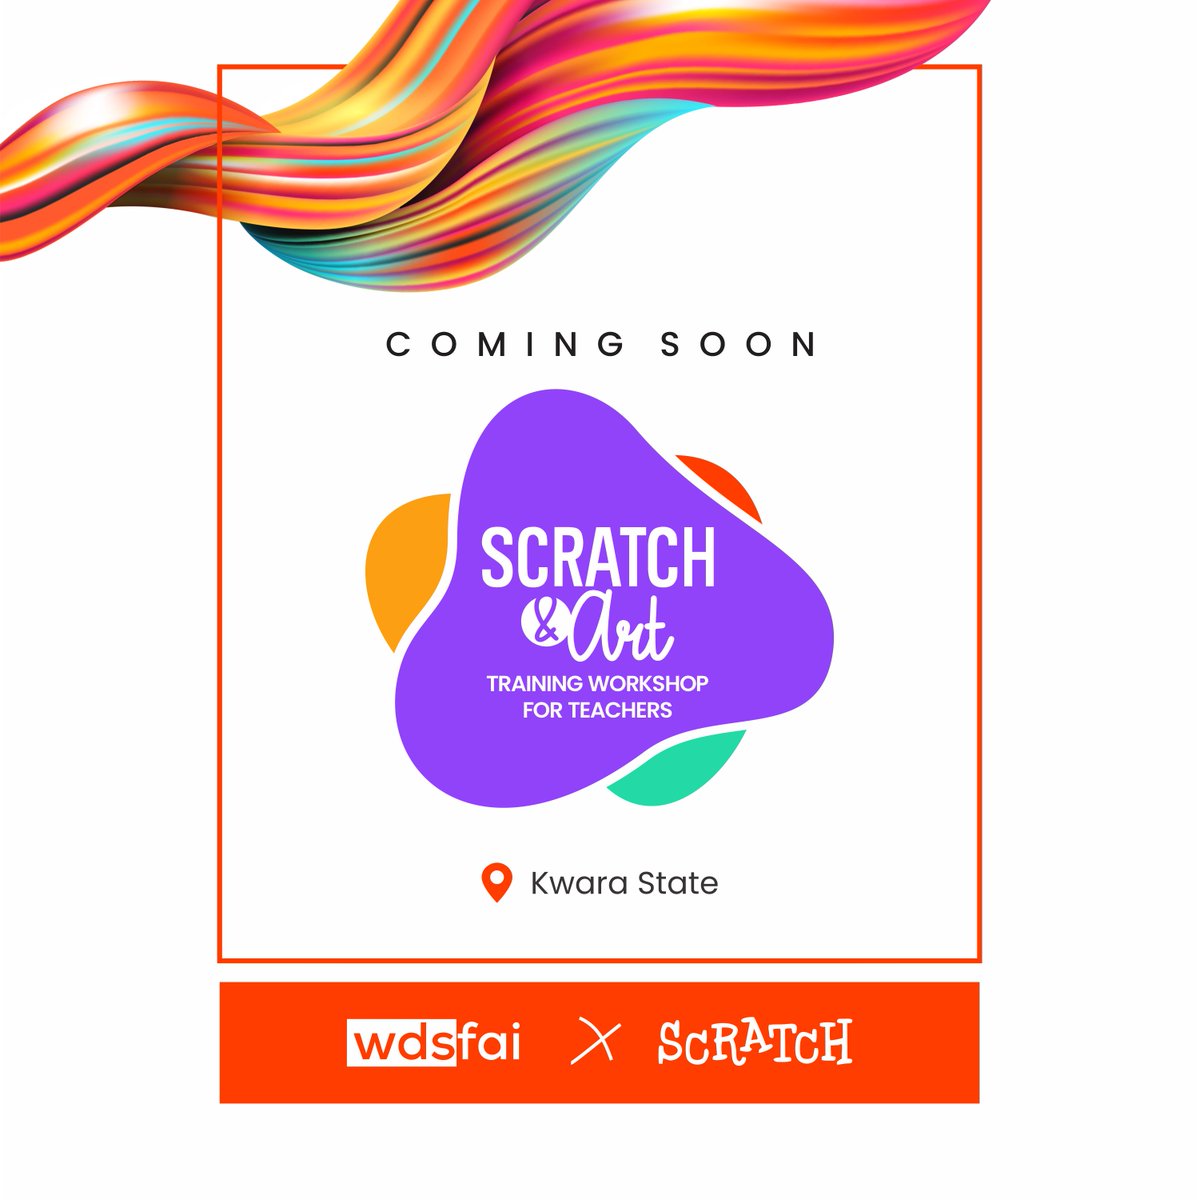 Let's empower ourselves and our students together!  @scratch @ScratchJr 

#ScratchAndArtWorkshop #KwaraTeachers #CreativeCodingForAll #ComingSoon